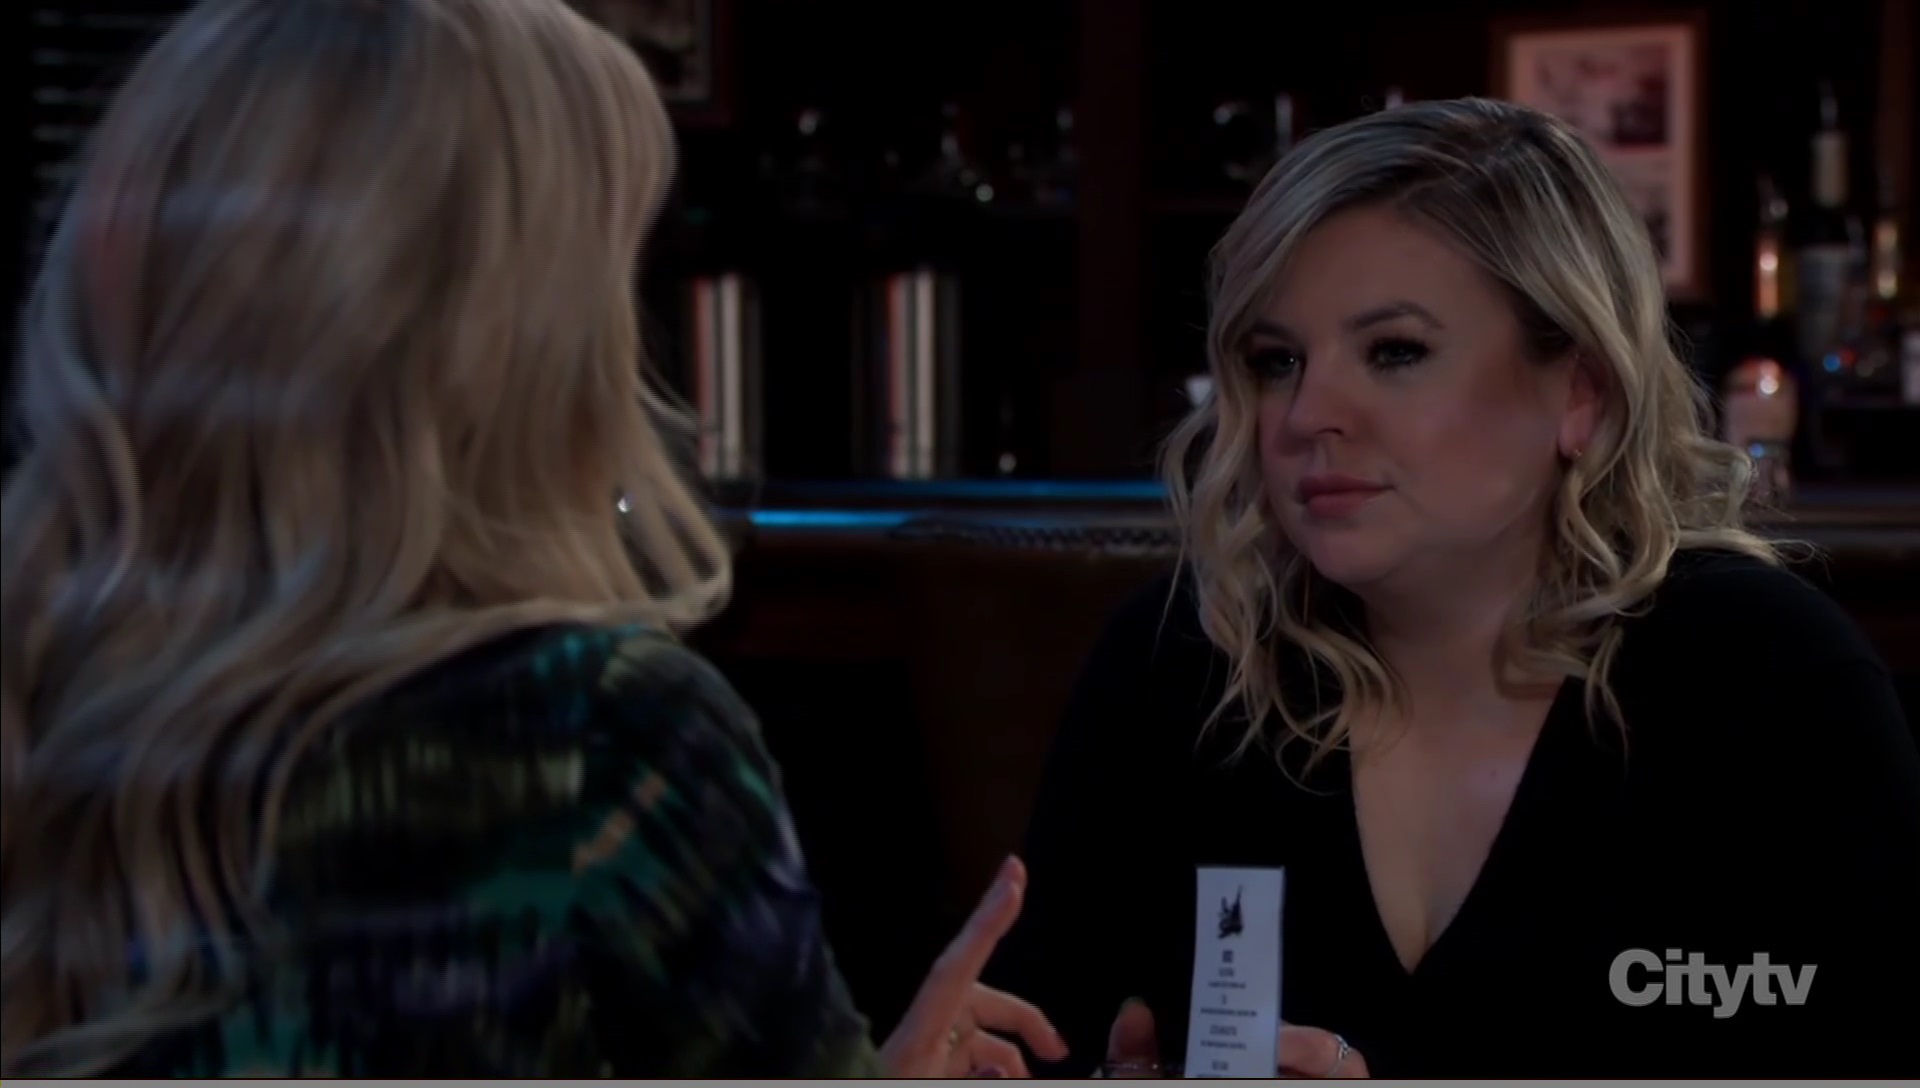 maxie mom concerned unwell general hospital